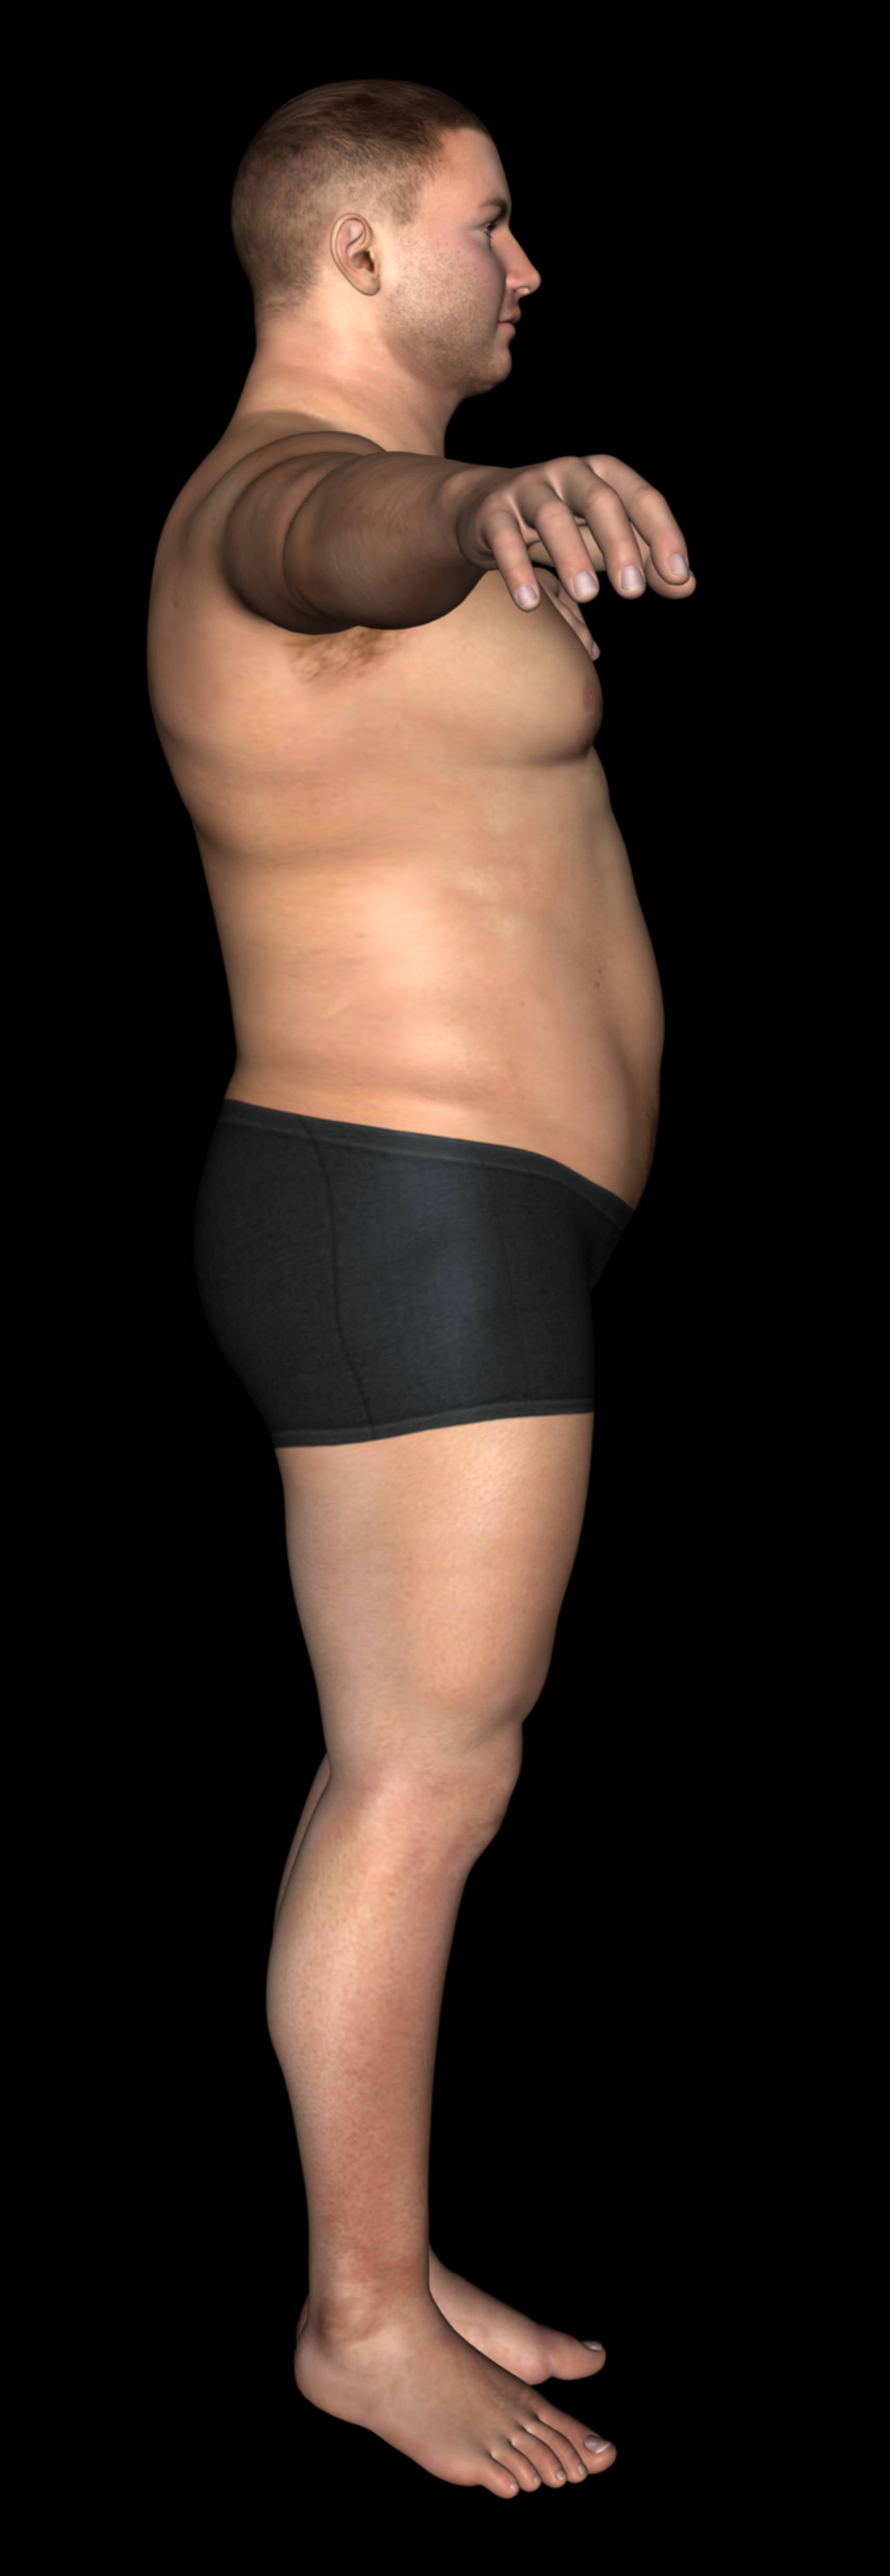 After-Body lift - Post Bariatric Plastic Surgery